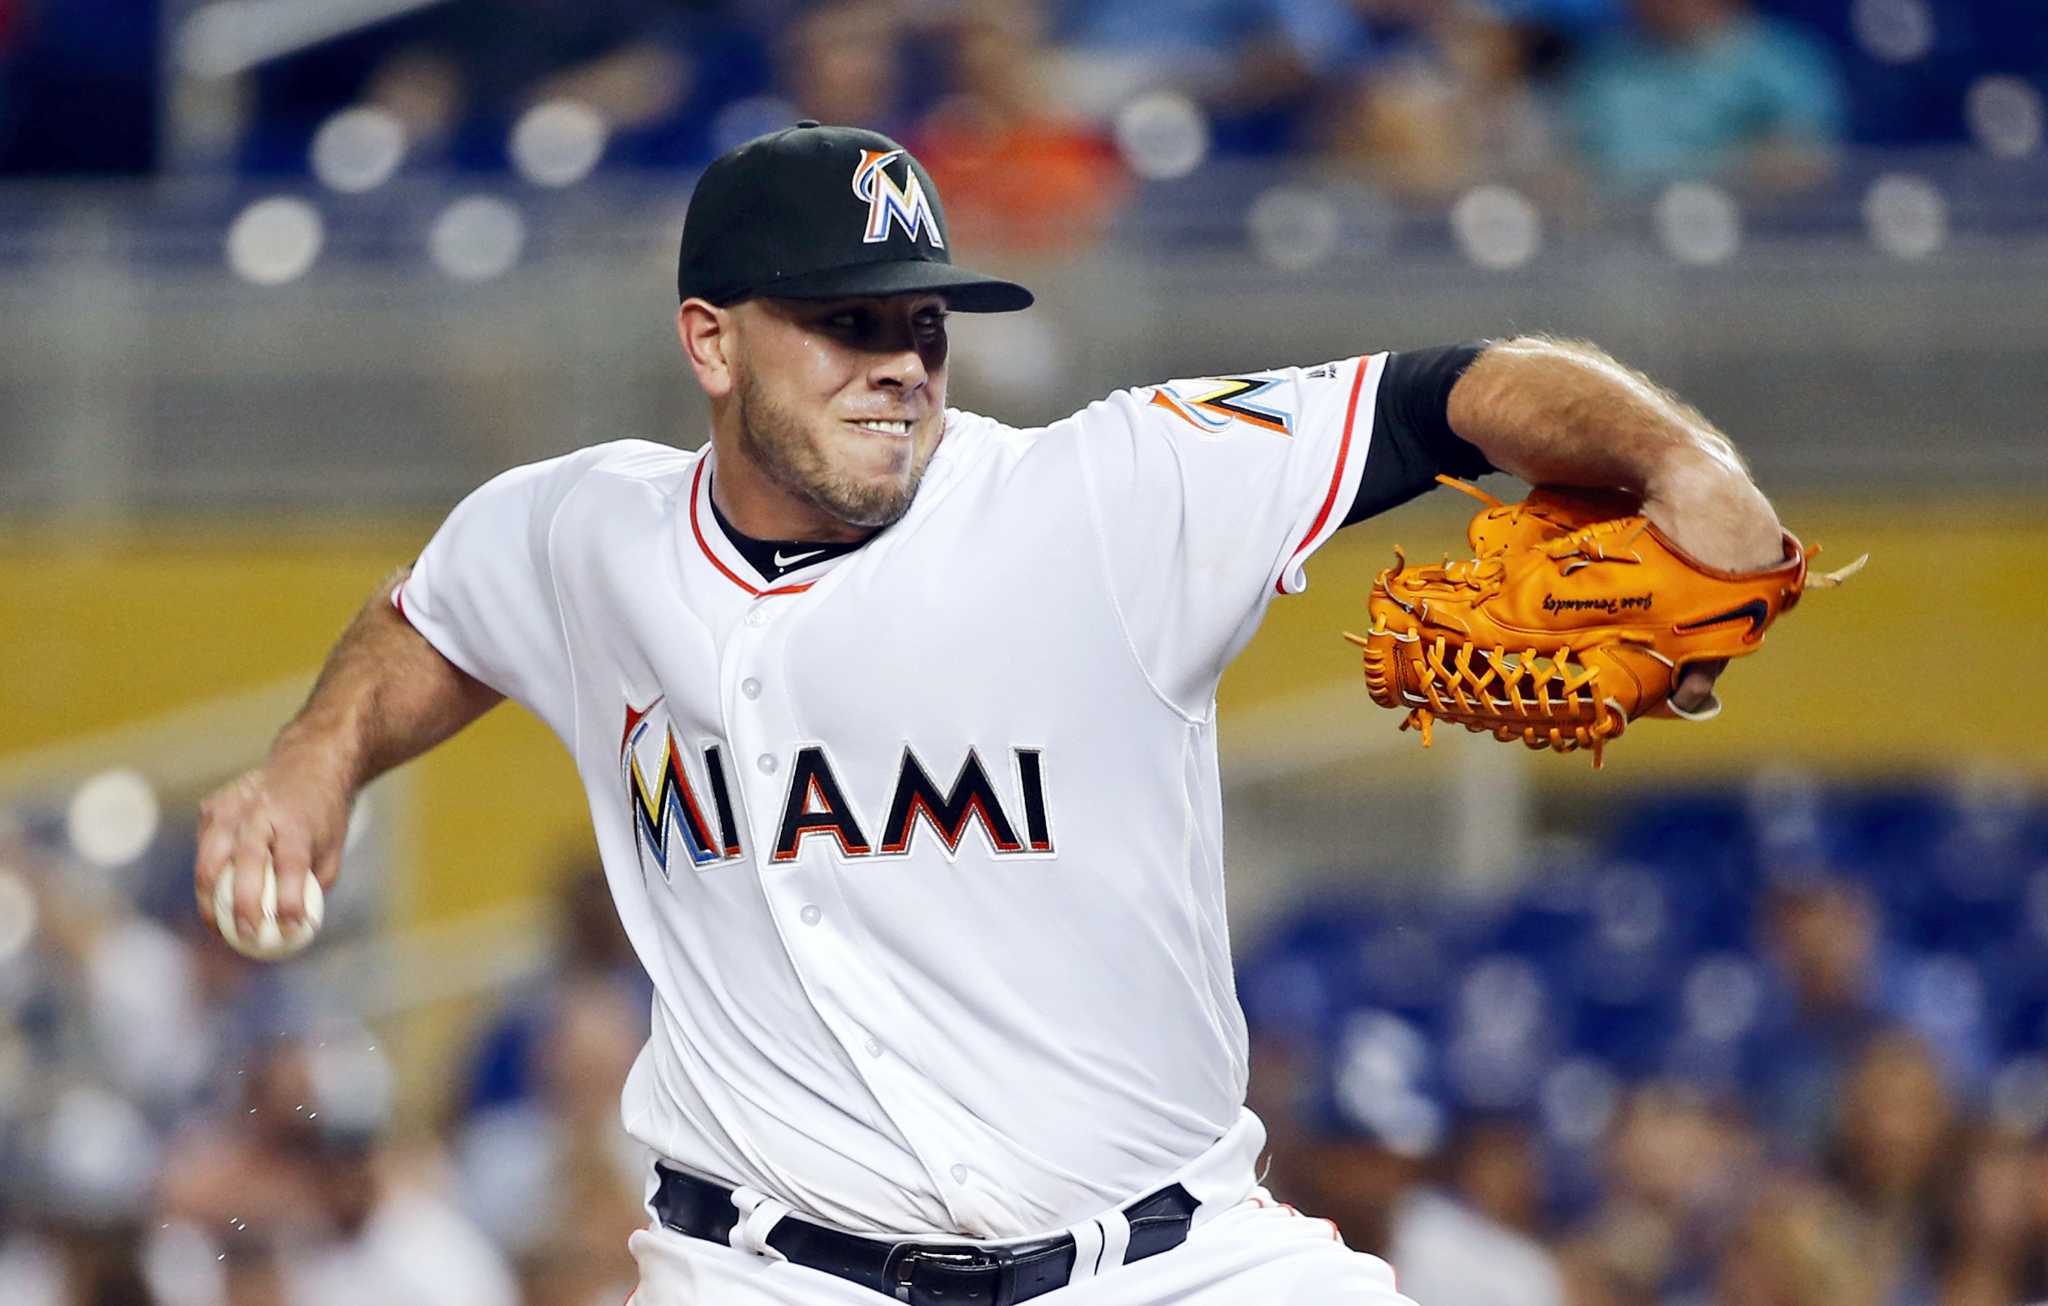 Report: Jose Fernandez was likely operating boat in deadly crash